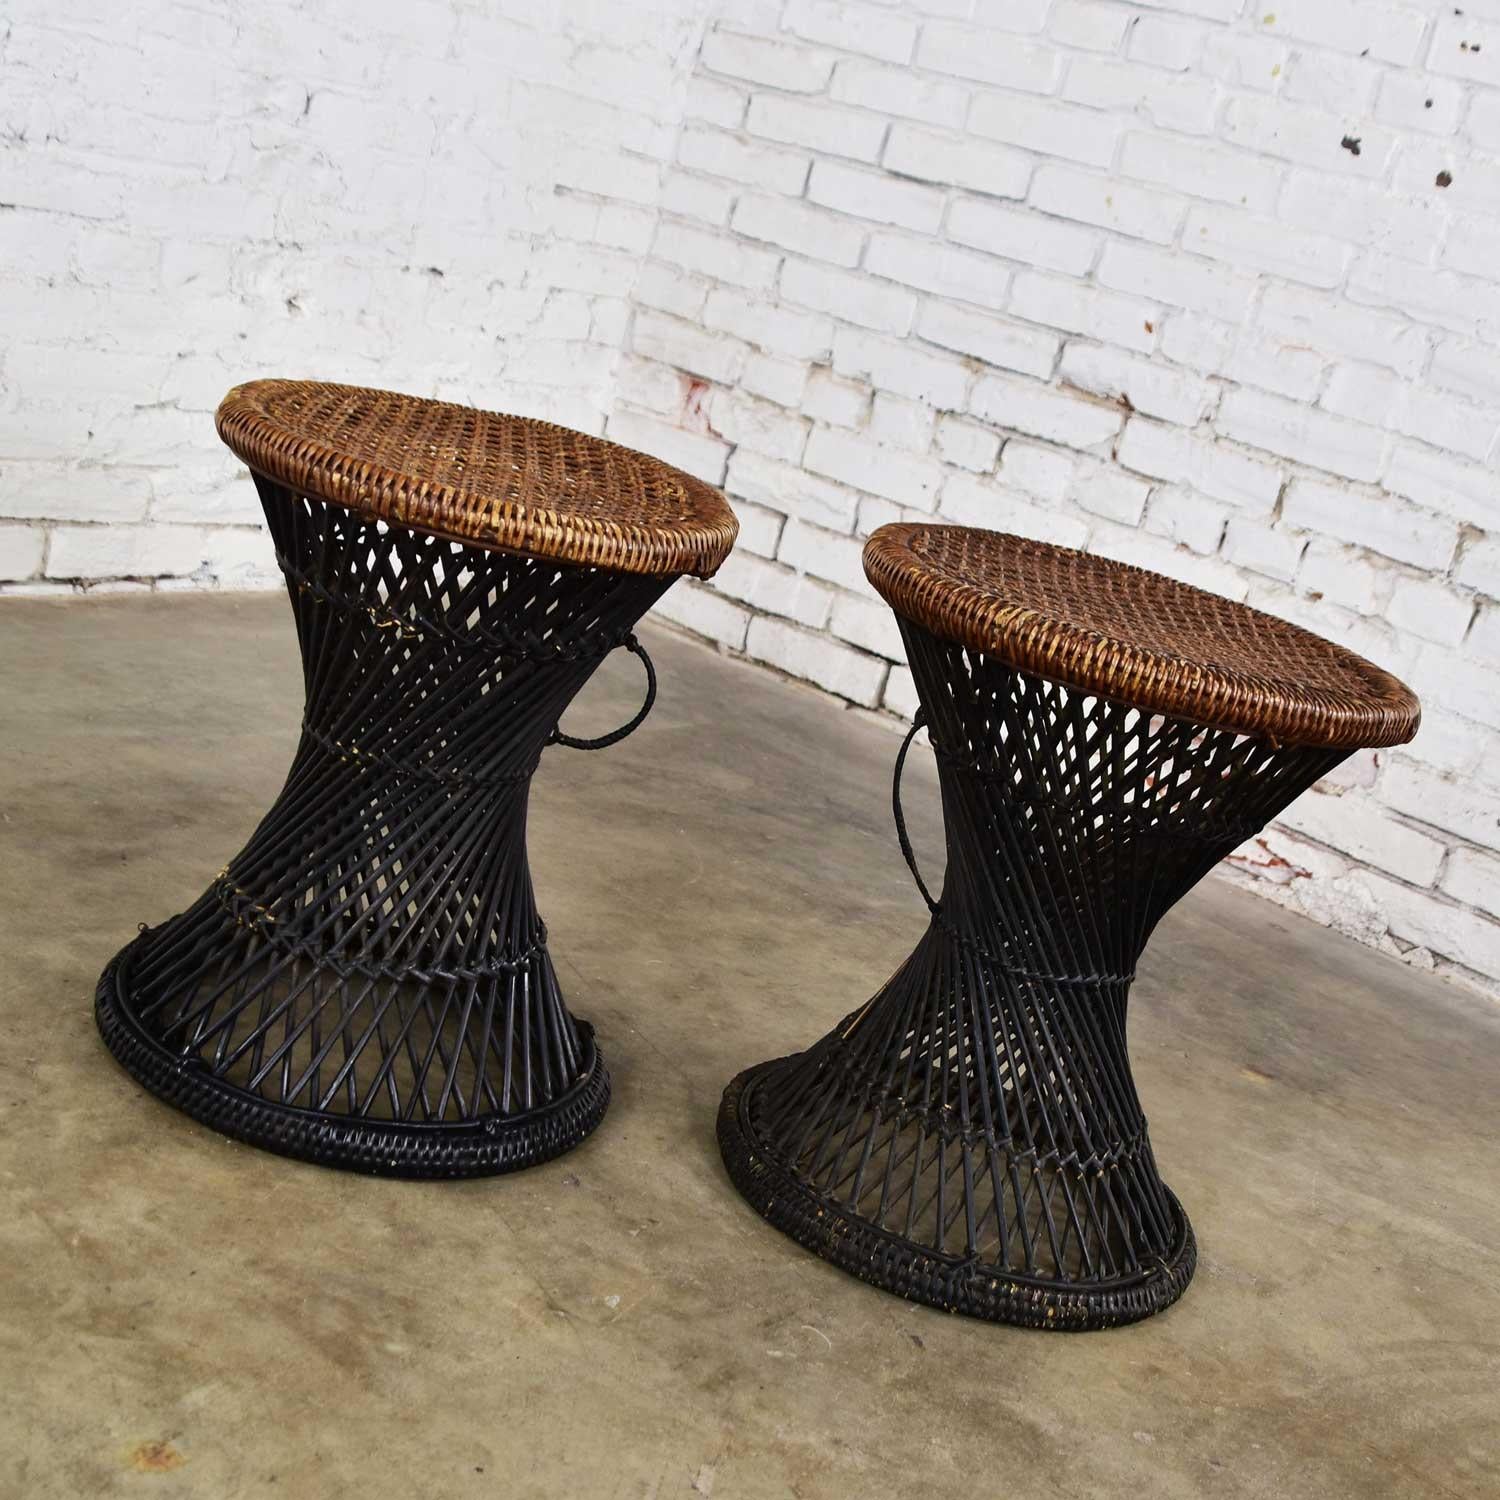 Wonderful pair of Mid-Century Modern rattan and cane cinched waist tables or stools. Beautiful vintage condition. They have been cleaned, a few small repairs made to the rattan wrappings, the bottom ring on one of the pieces was repainted black